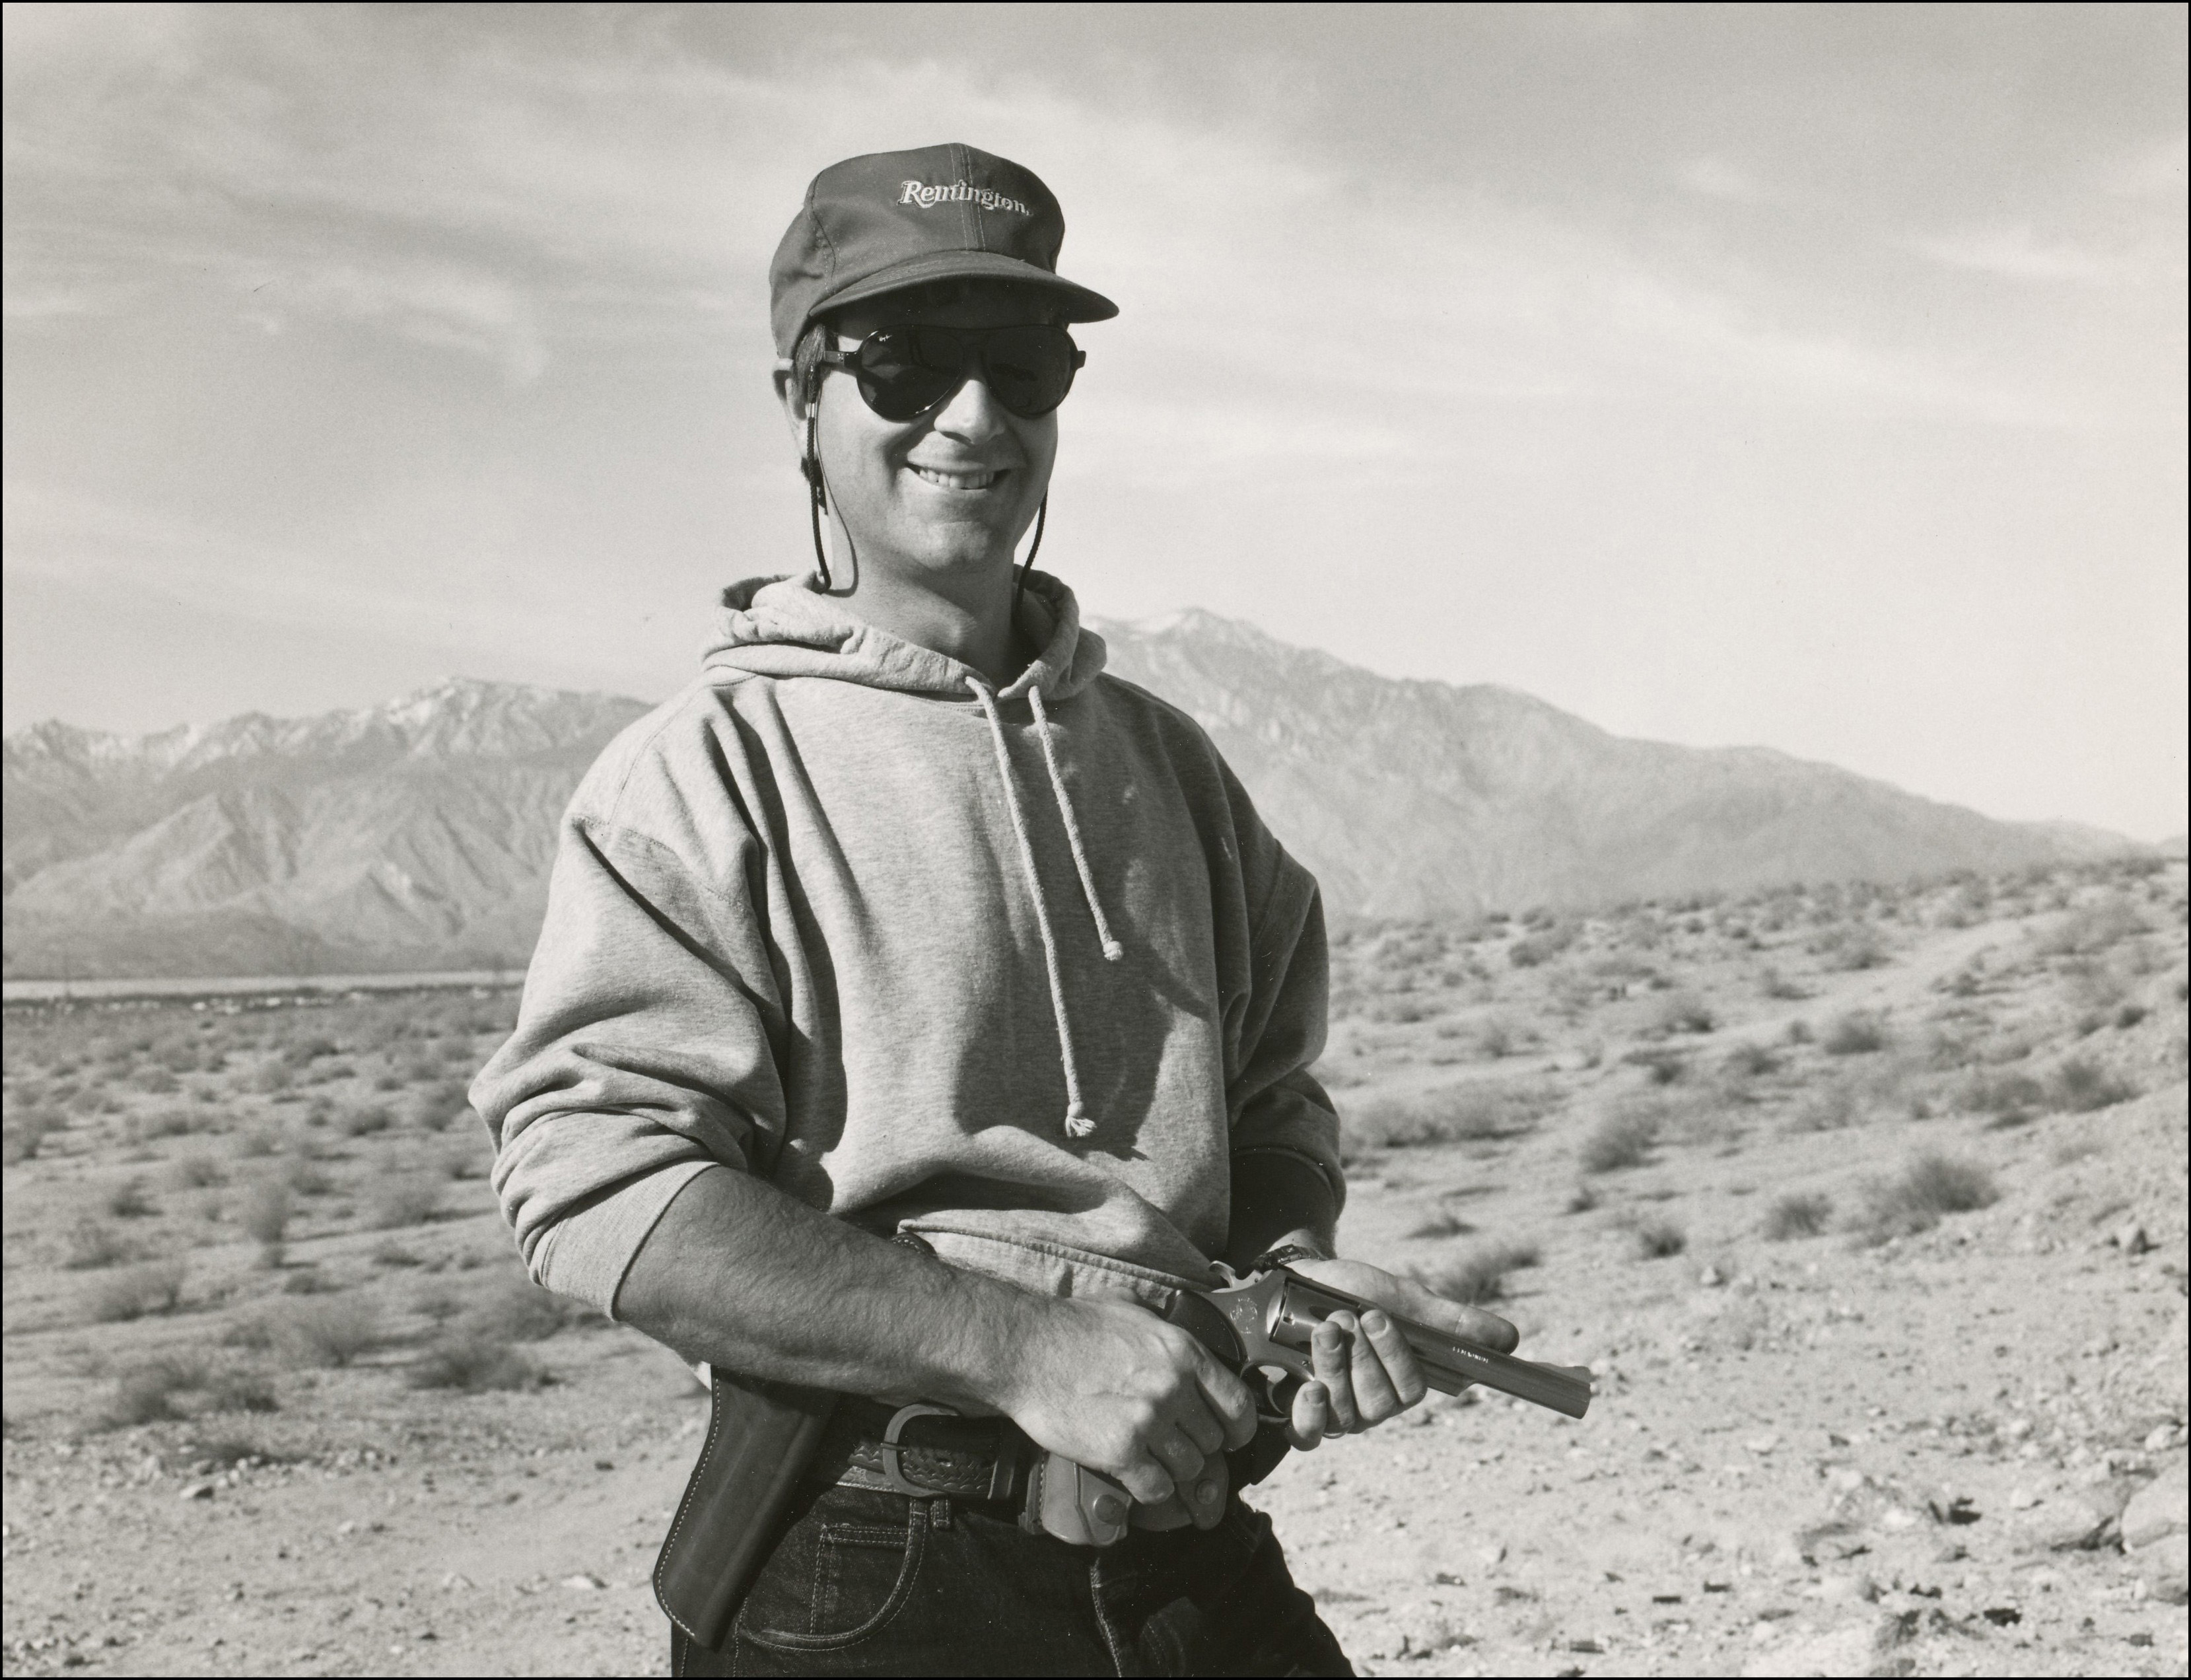 Man in baseball cap, sunglasses and hoodie standing with pistol in hand. In dessert area with mountains in the background